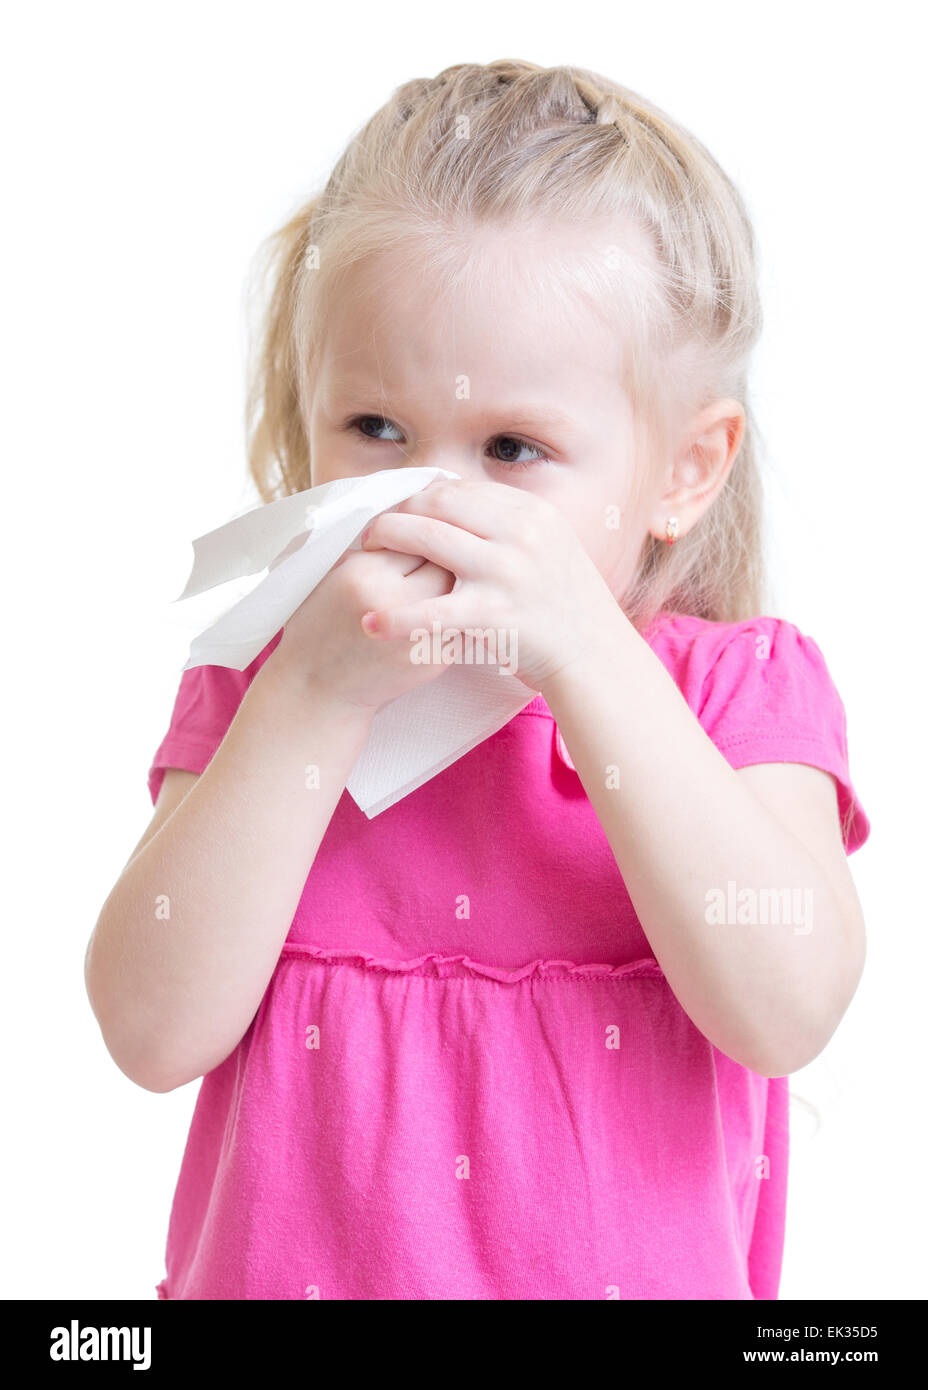 sick kid wiping or cleaning nose with tissue isolated Stock Photo